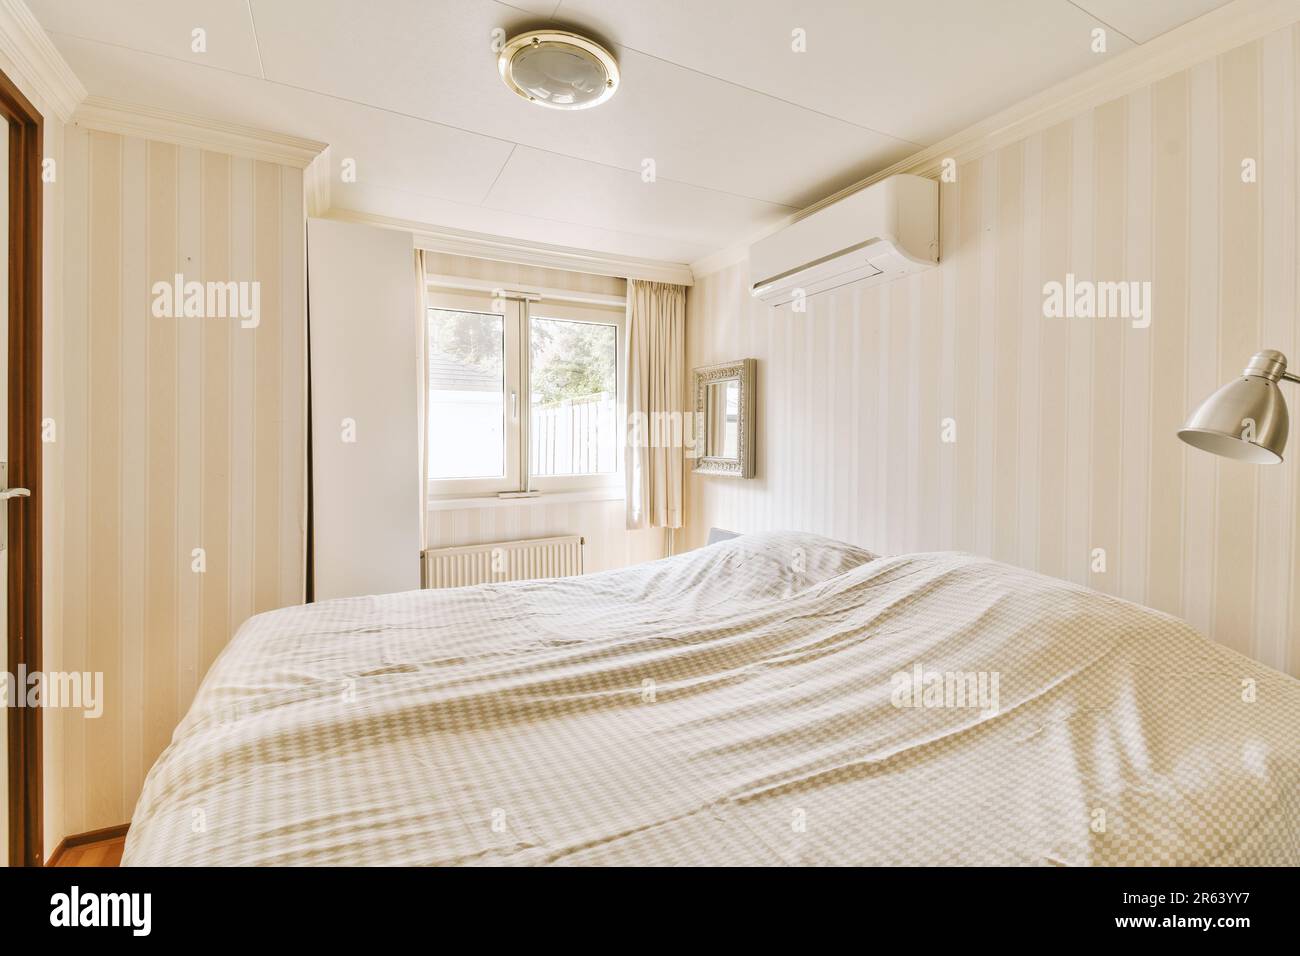 a bed in a room with striped wallpaper on the walls and wood flooring around the headboards Stock Photo